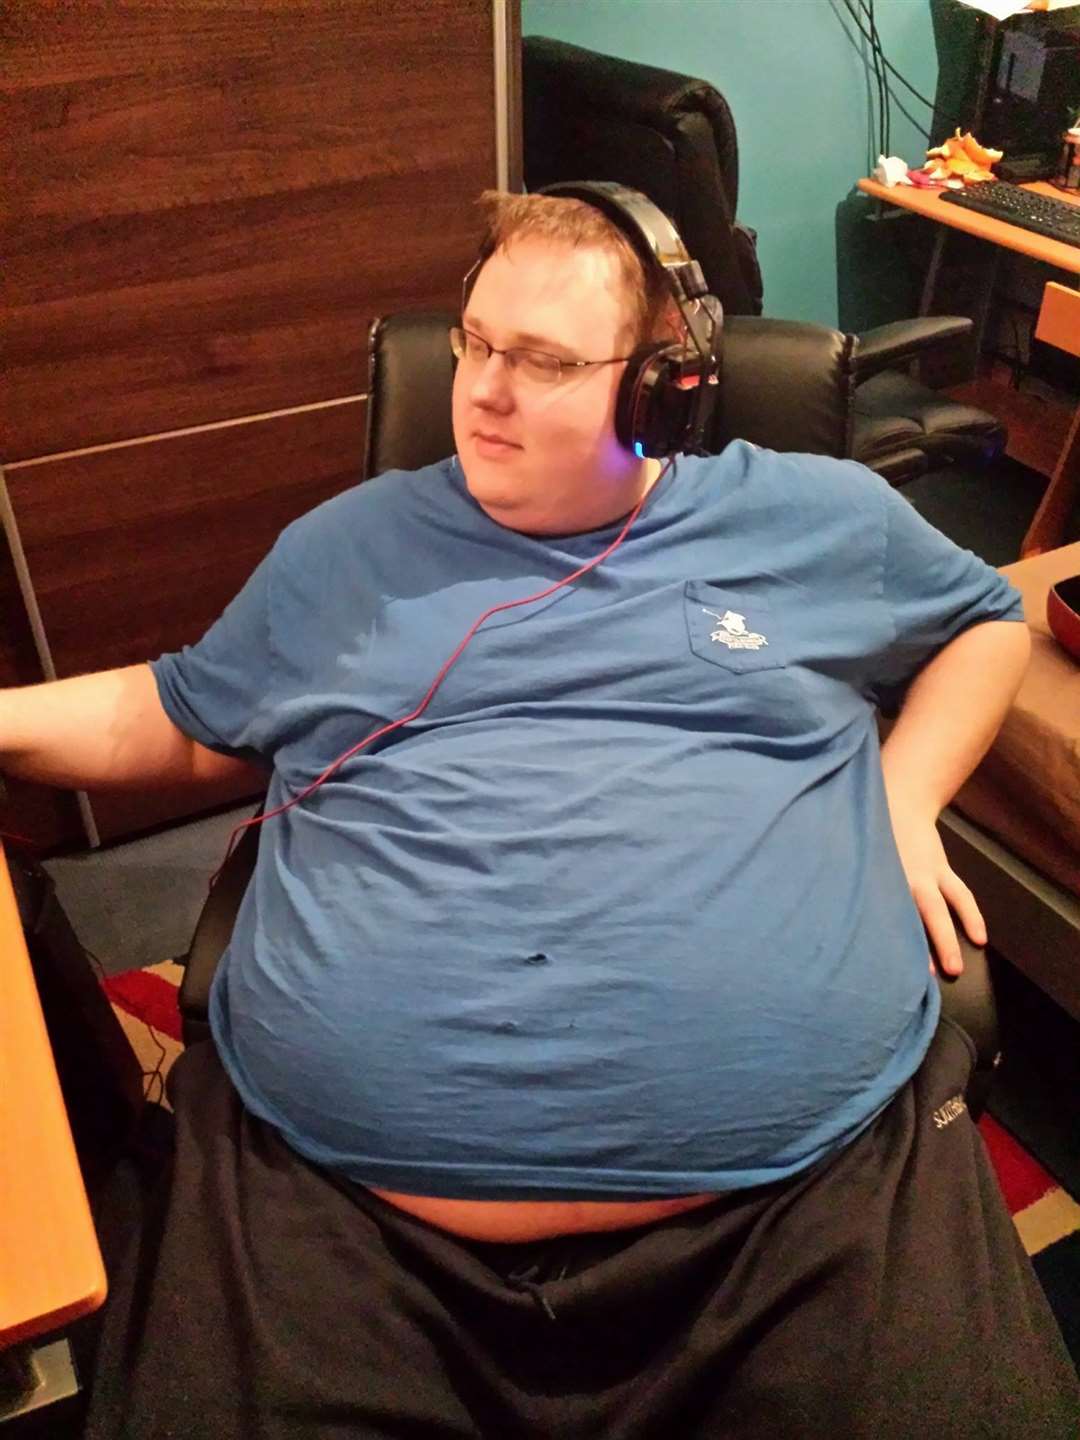 Former gaming addict David Breaker, from Gillingham, was left feeling suicidal when he weighed 32 stone